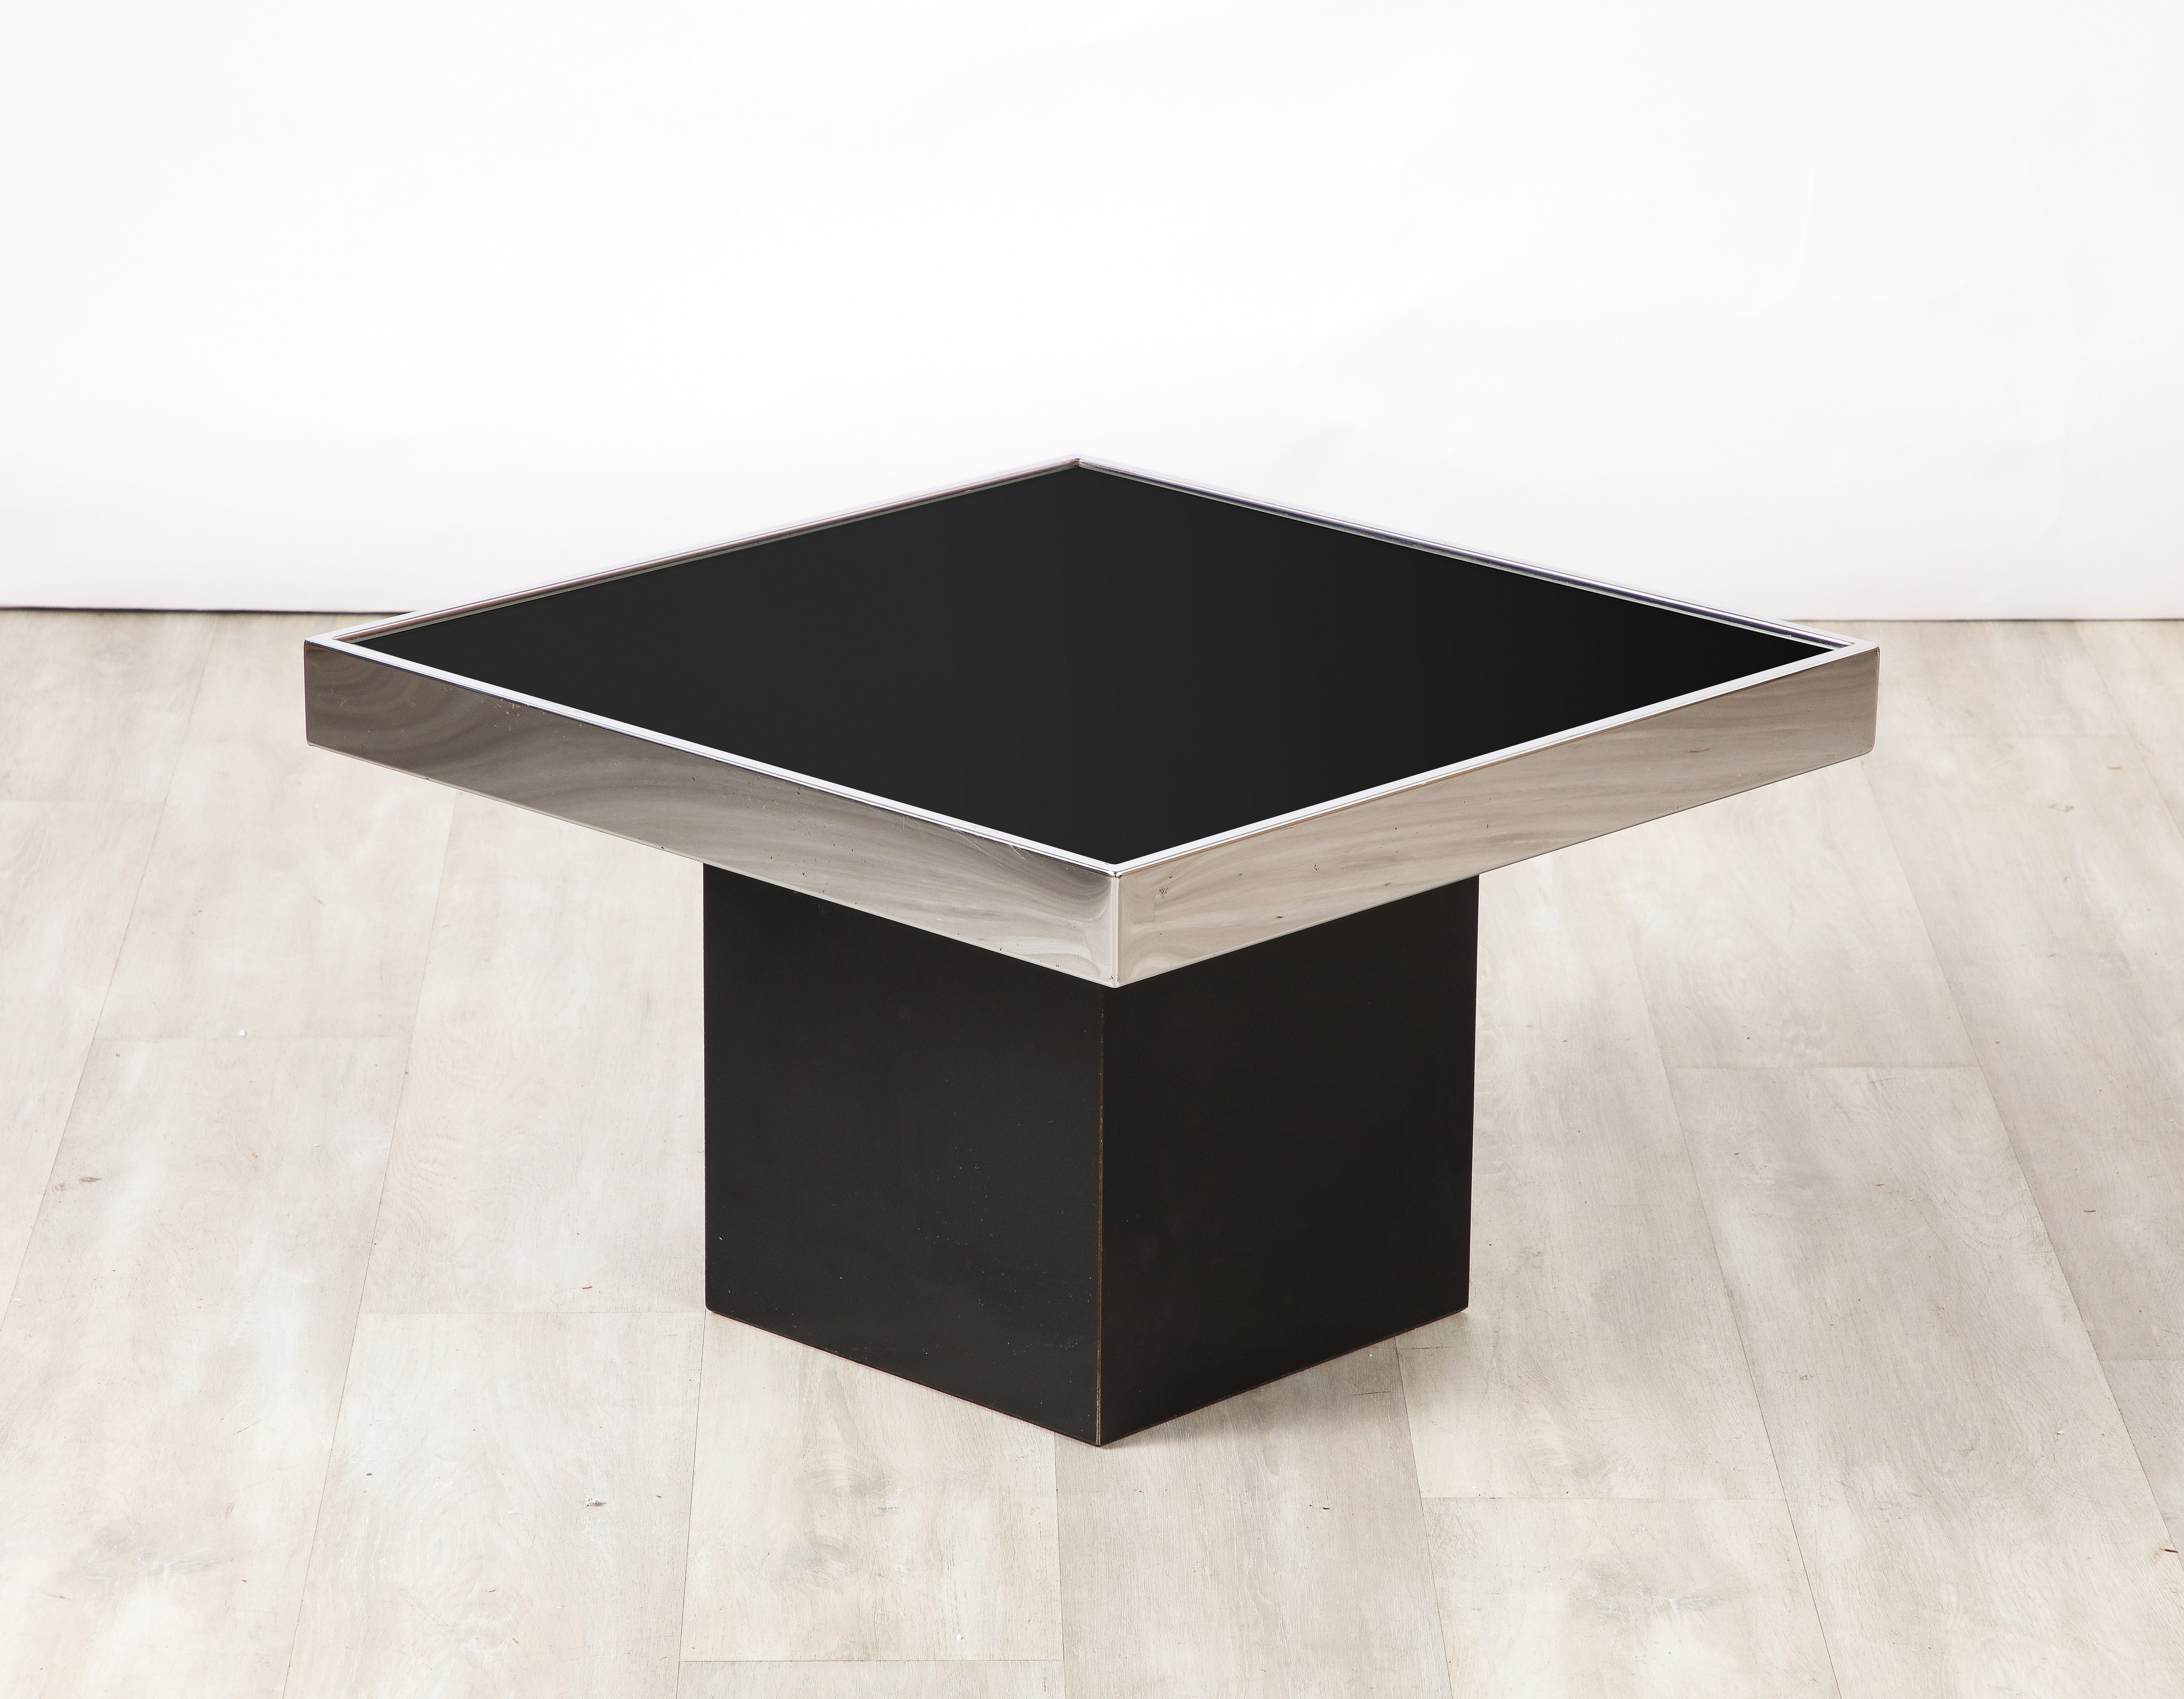 A Willy Rizzo for Cidue square side/end/or coffee table; with a sleek and seamless design.  The chic black glass surface is inset to the chrome square apron and supported on a black plinth base.  Very glamourous and timeless design, highly